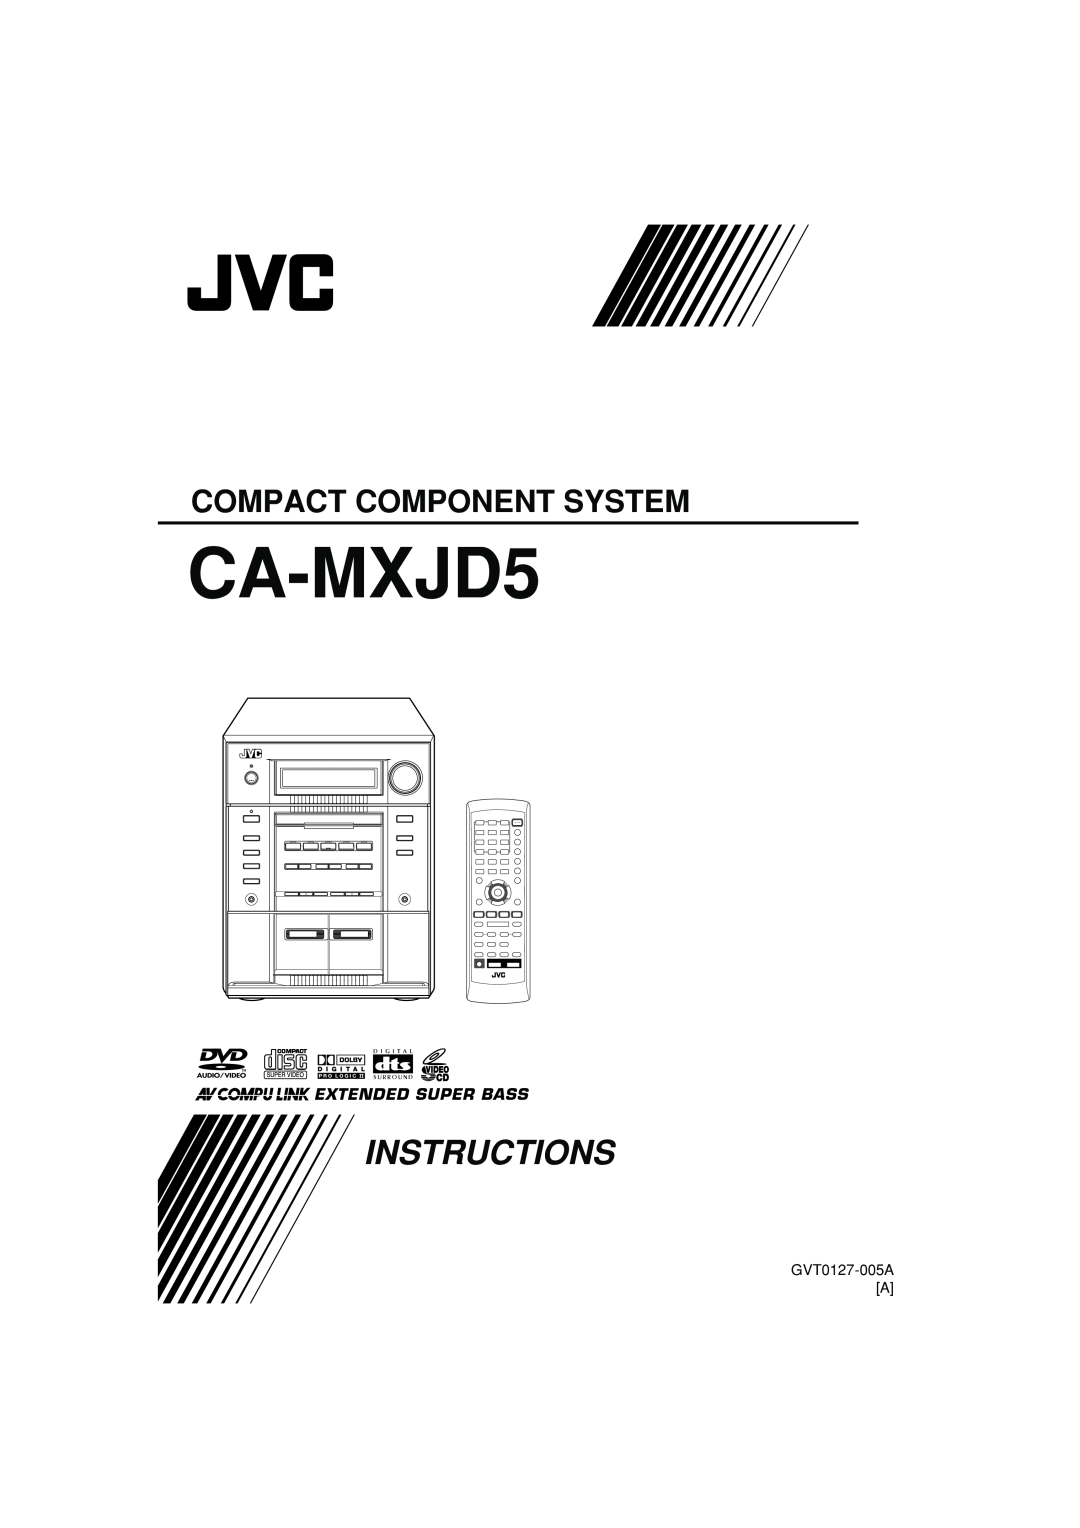 JVC CA-MXJD5 manual GVT0127-005AA, Instructions, Compact Component System, Extended Super Bass 